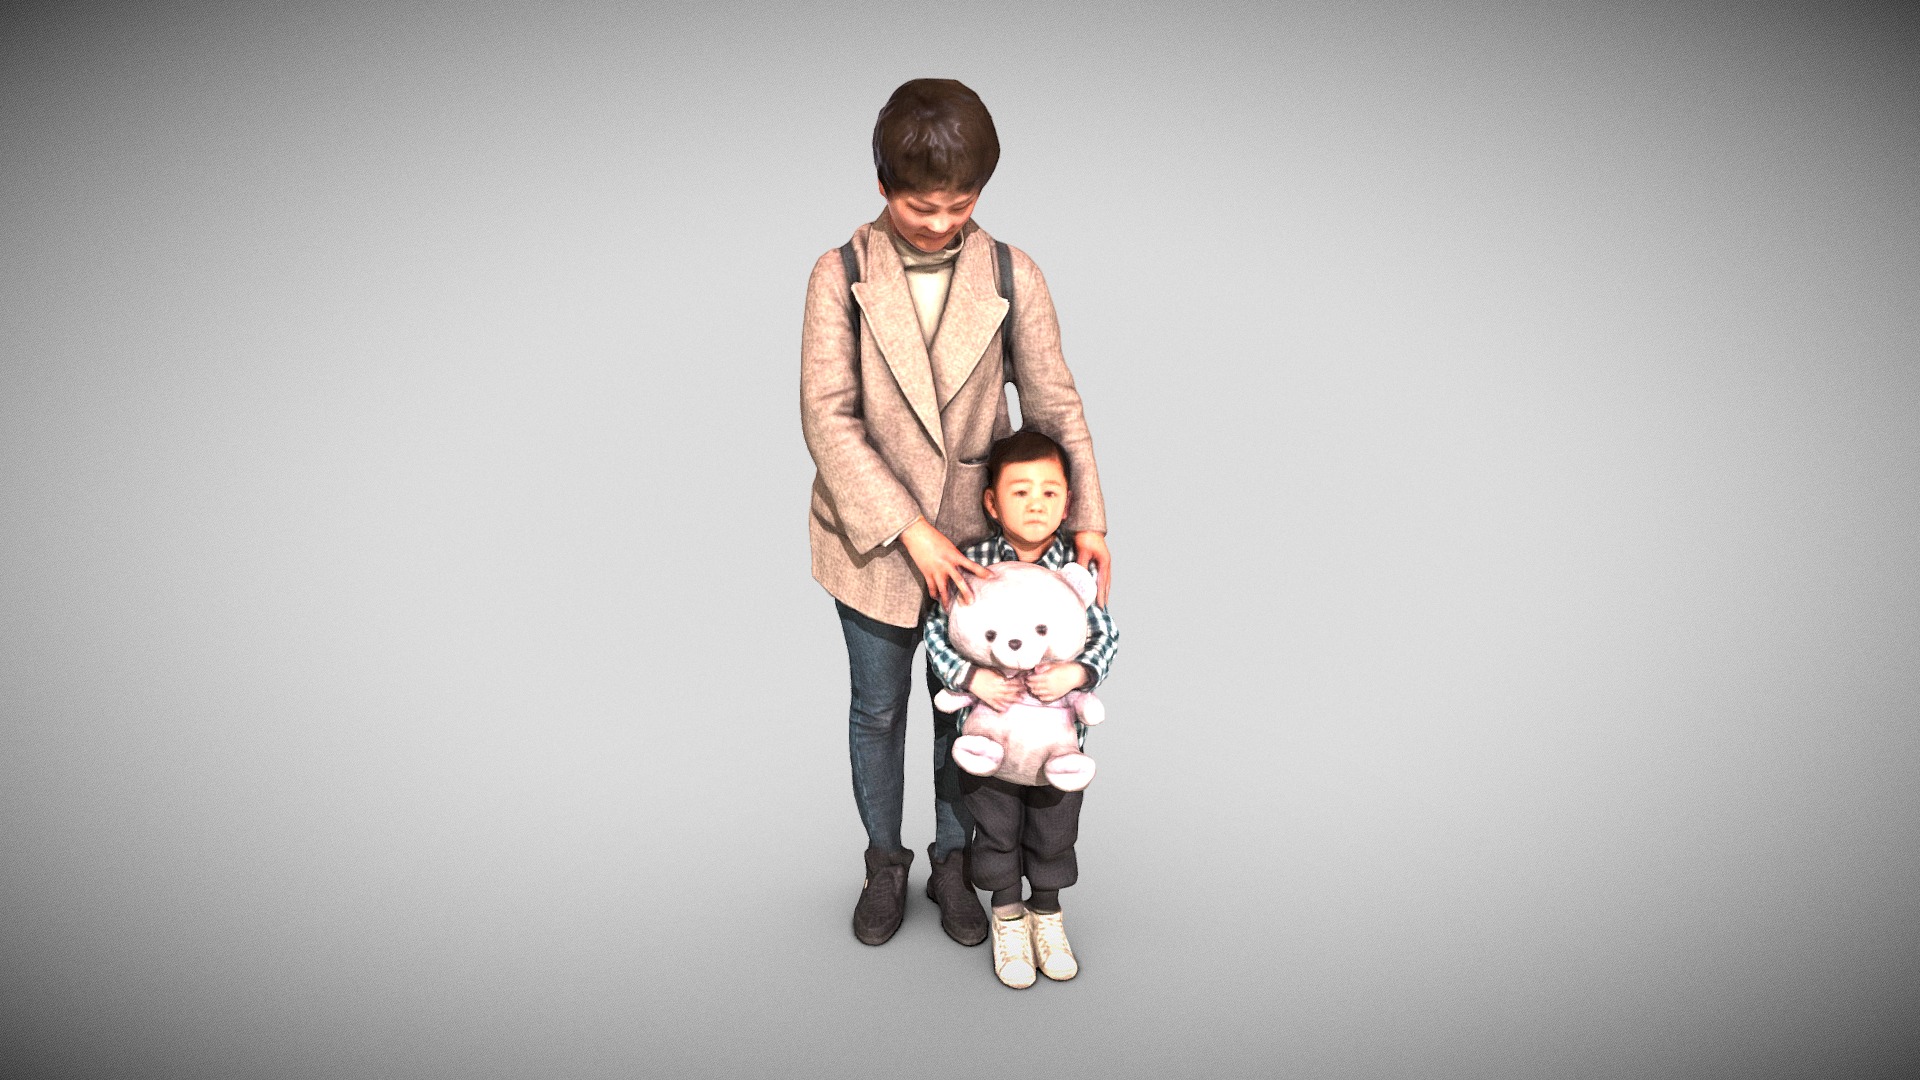 3D model 957-familly - This is a 3D model of the 957-familly. The 3D model is about a boy holding a doll.